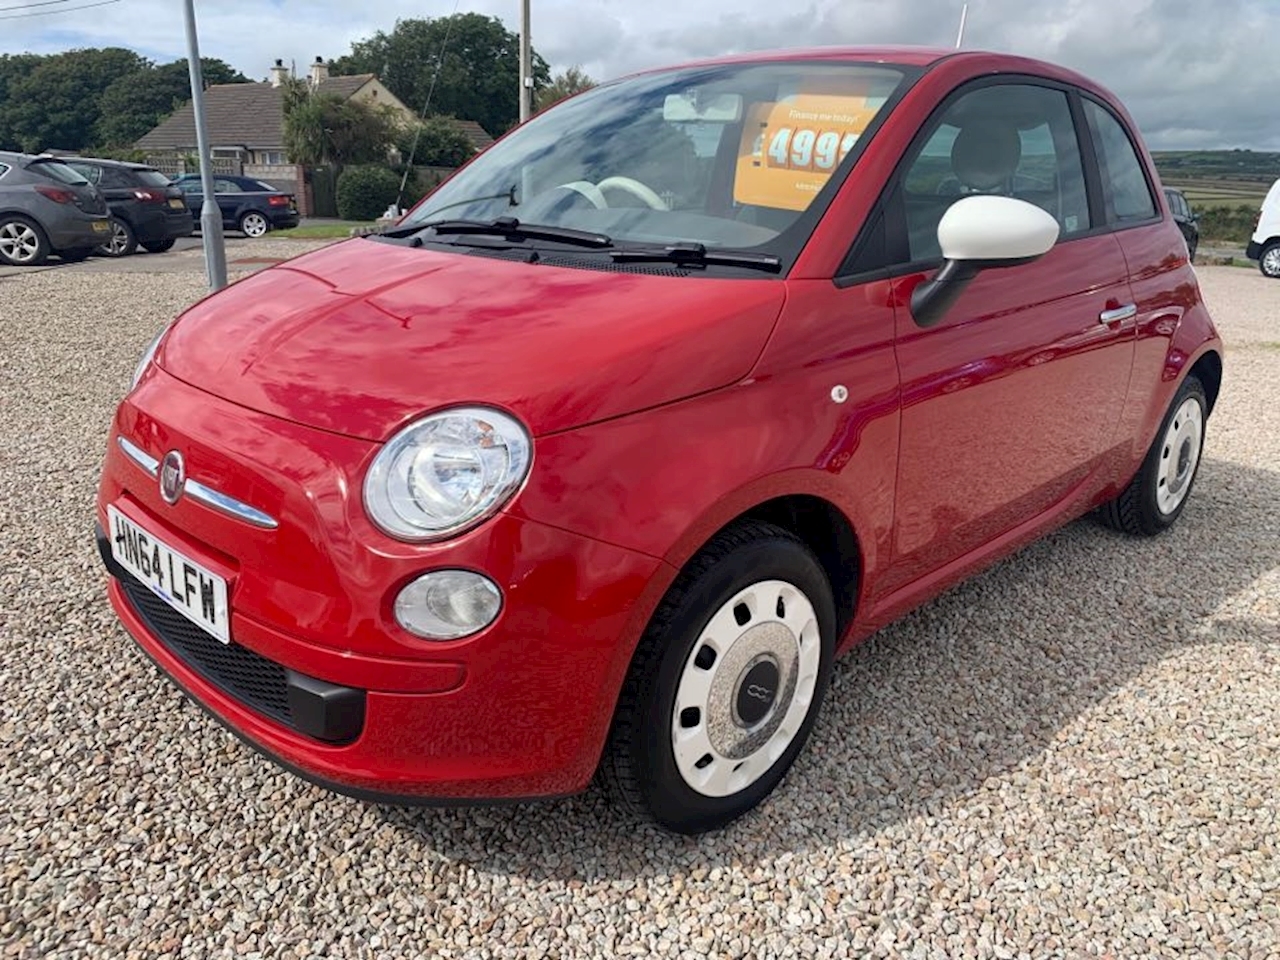 500 Colour Therapy Hatchback 1.2 Manual Petrol